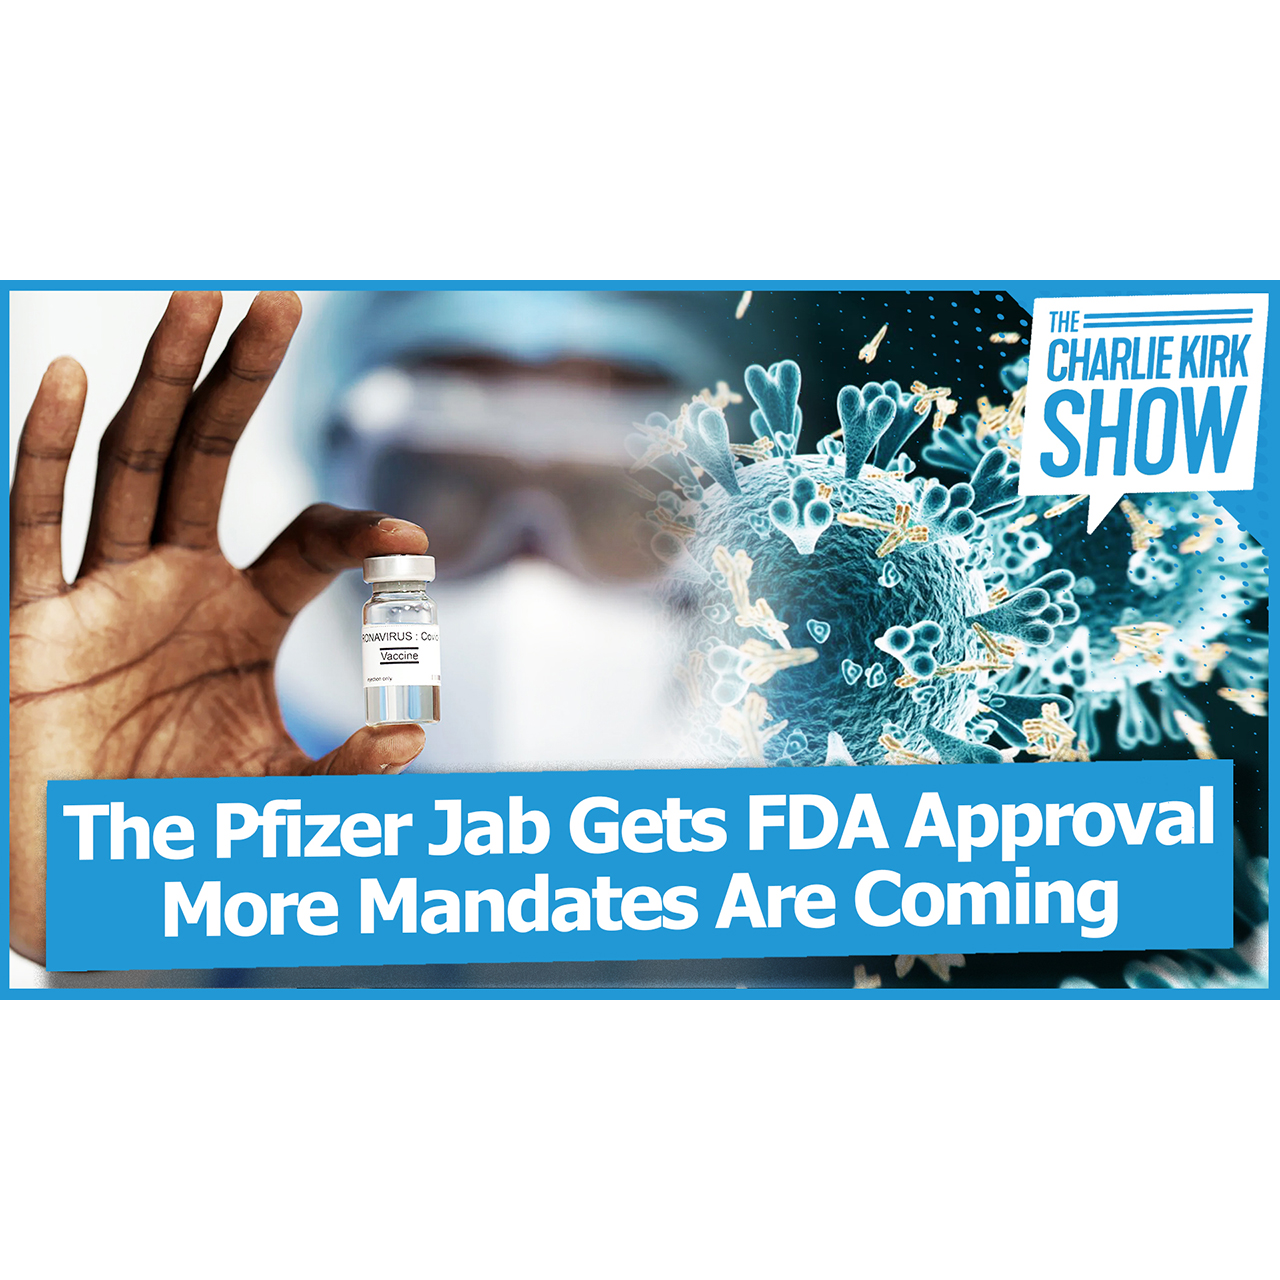 The Pfizer Jab Gets FDA Approval—More Mandates Are Coming